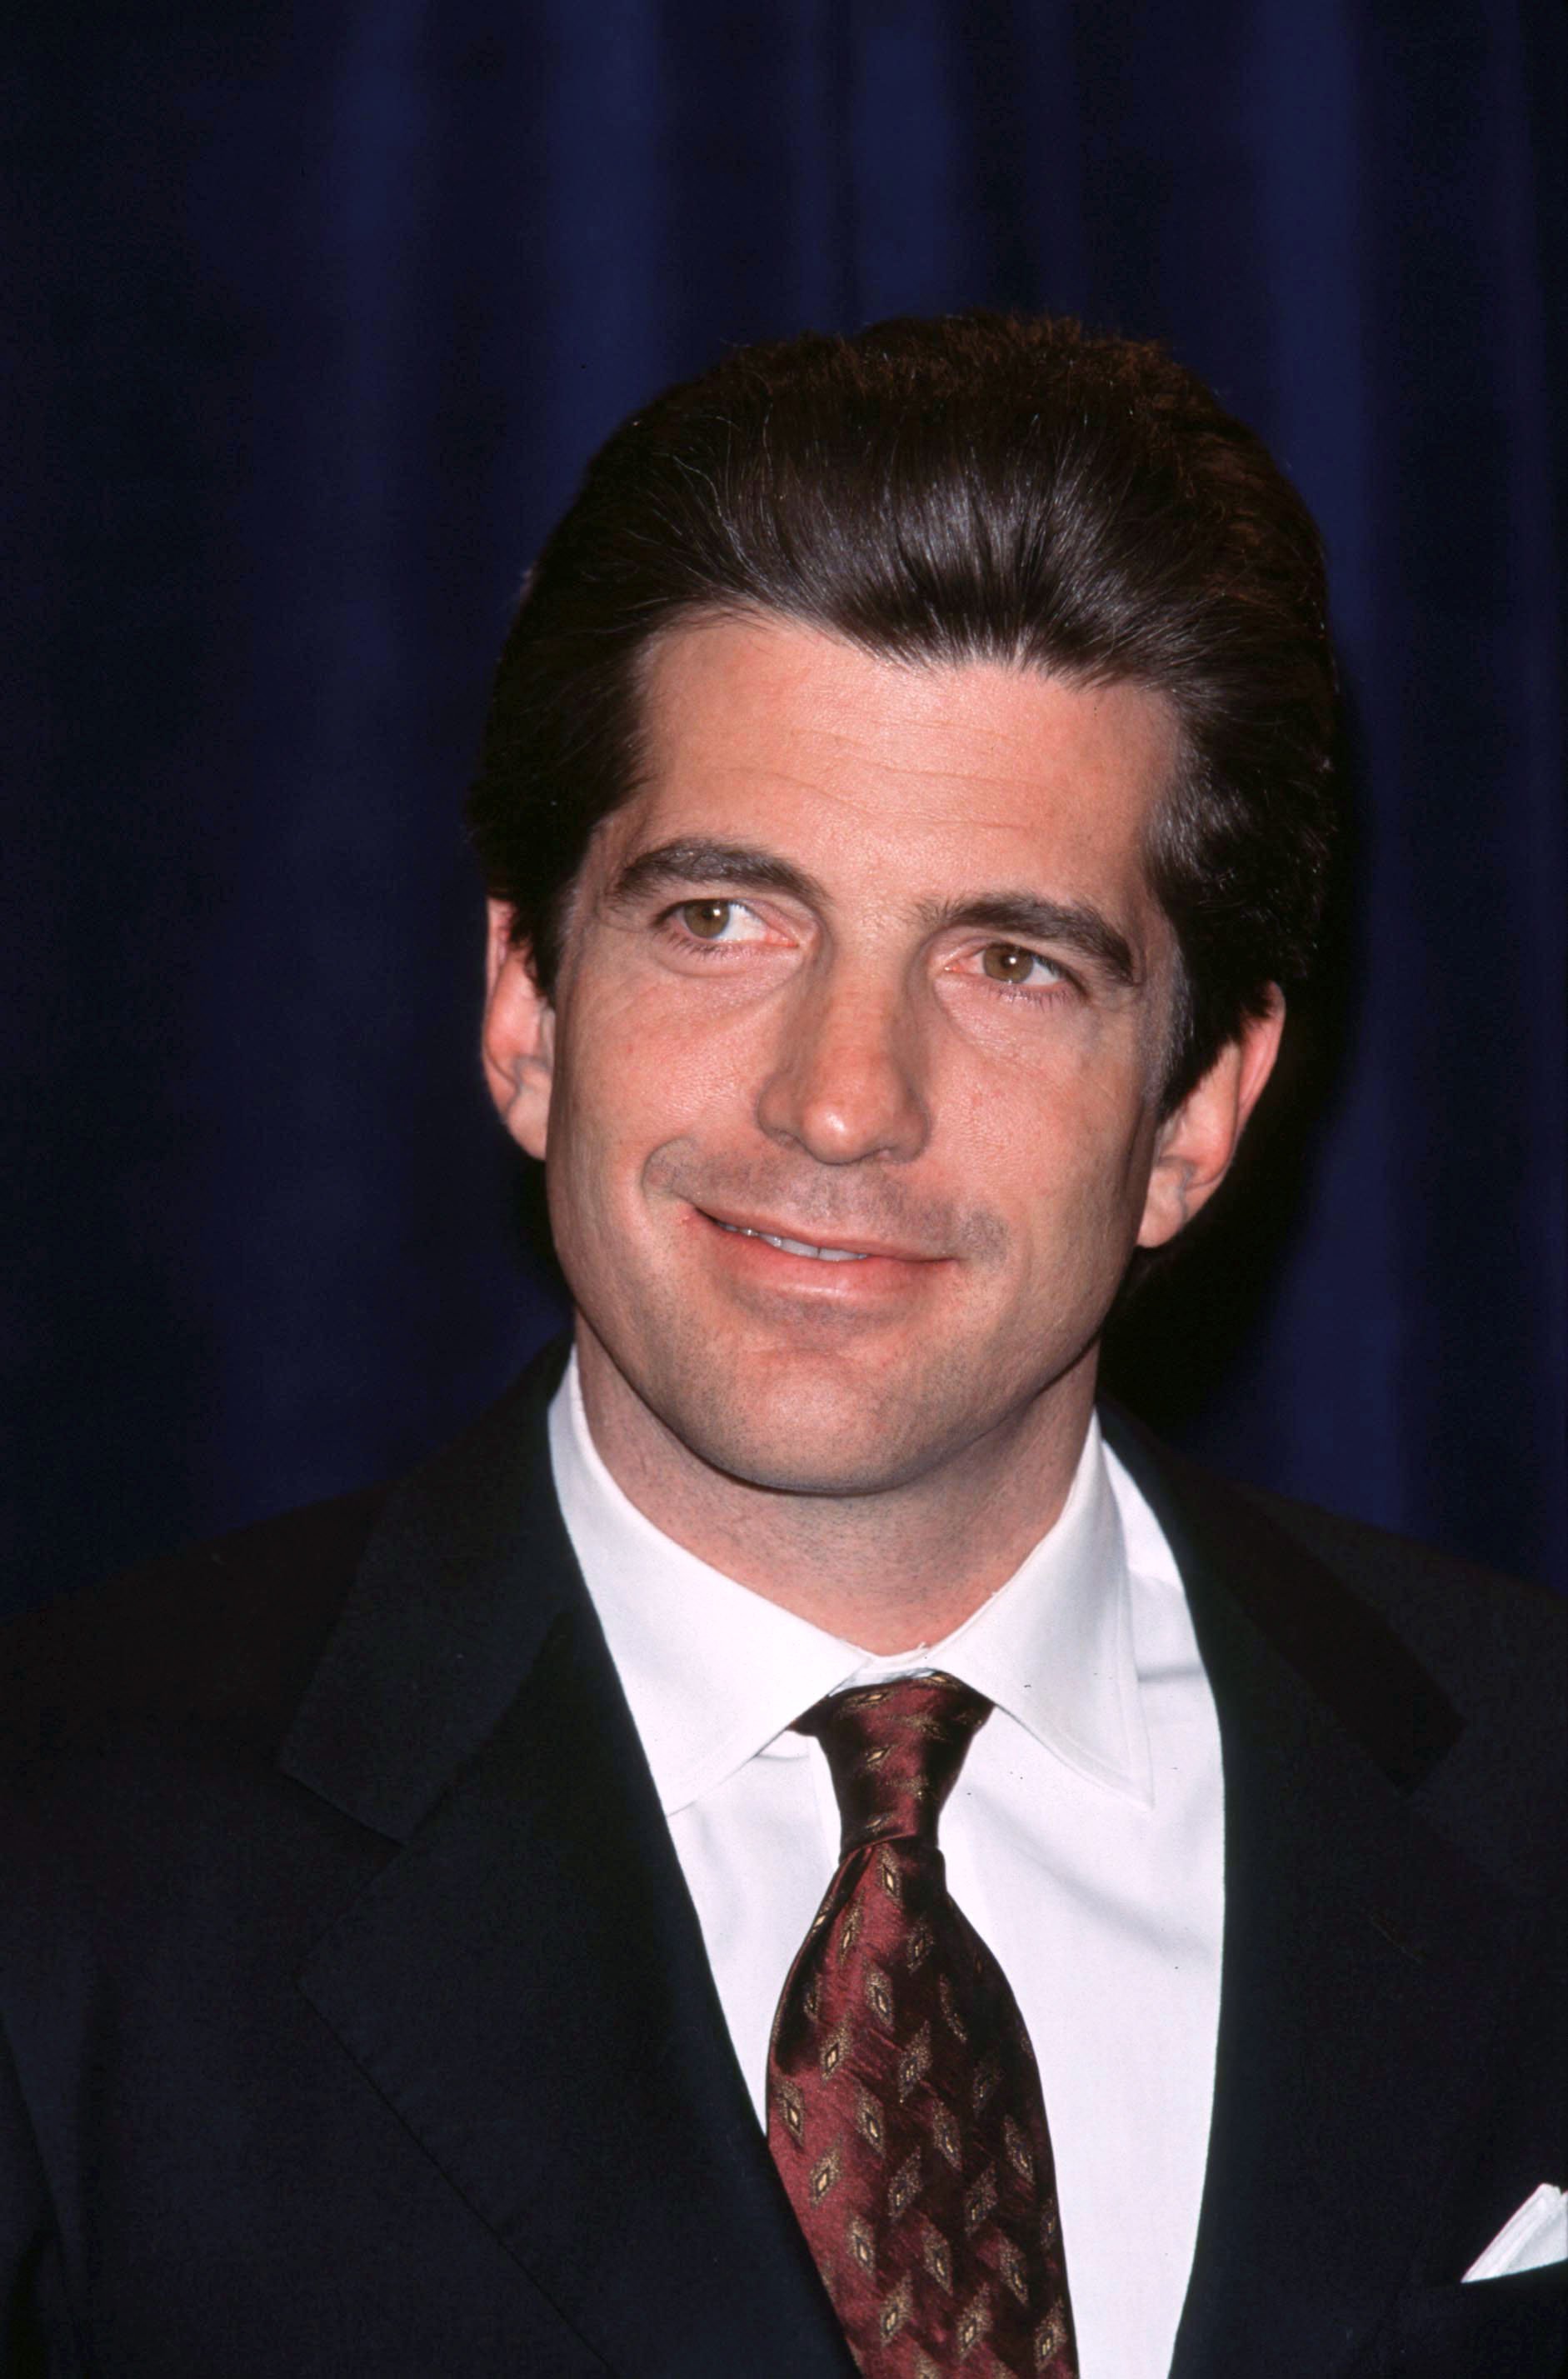 John F. Kennedy Jr. attends the Jackie Robinson Foundation Dinner on March 8, 1999. | Source: Getty Images.